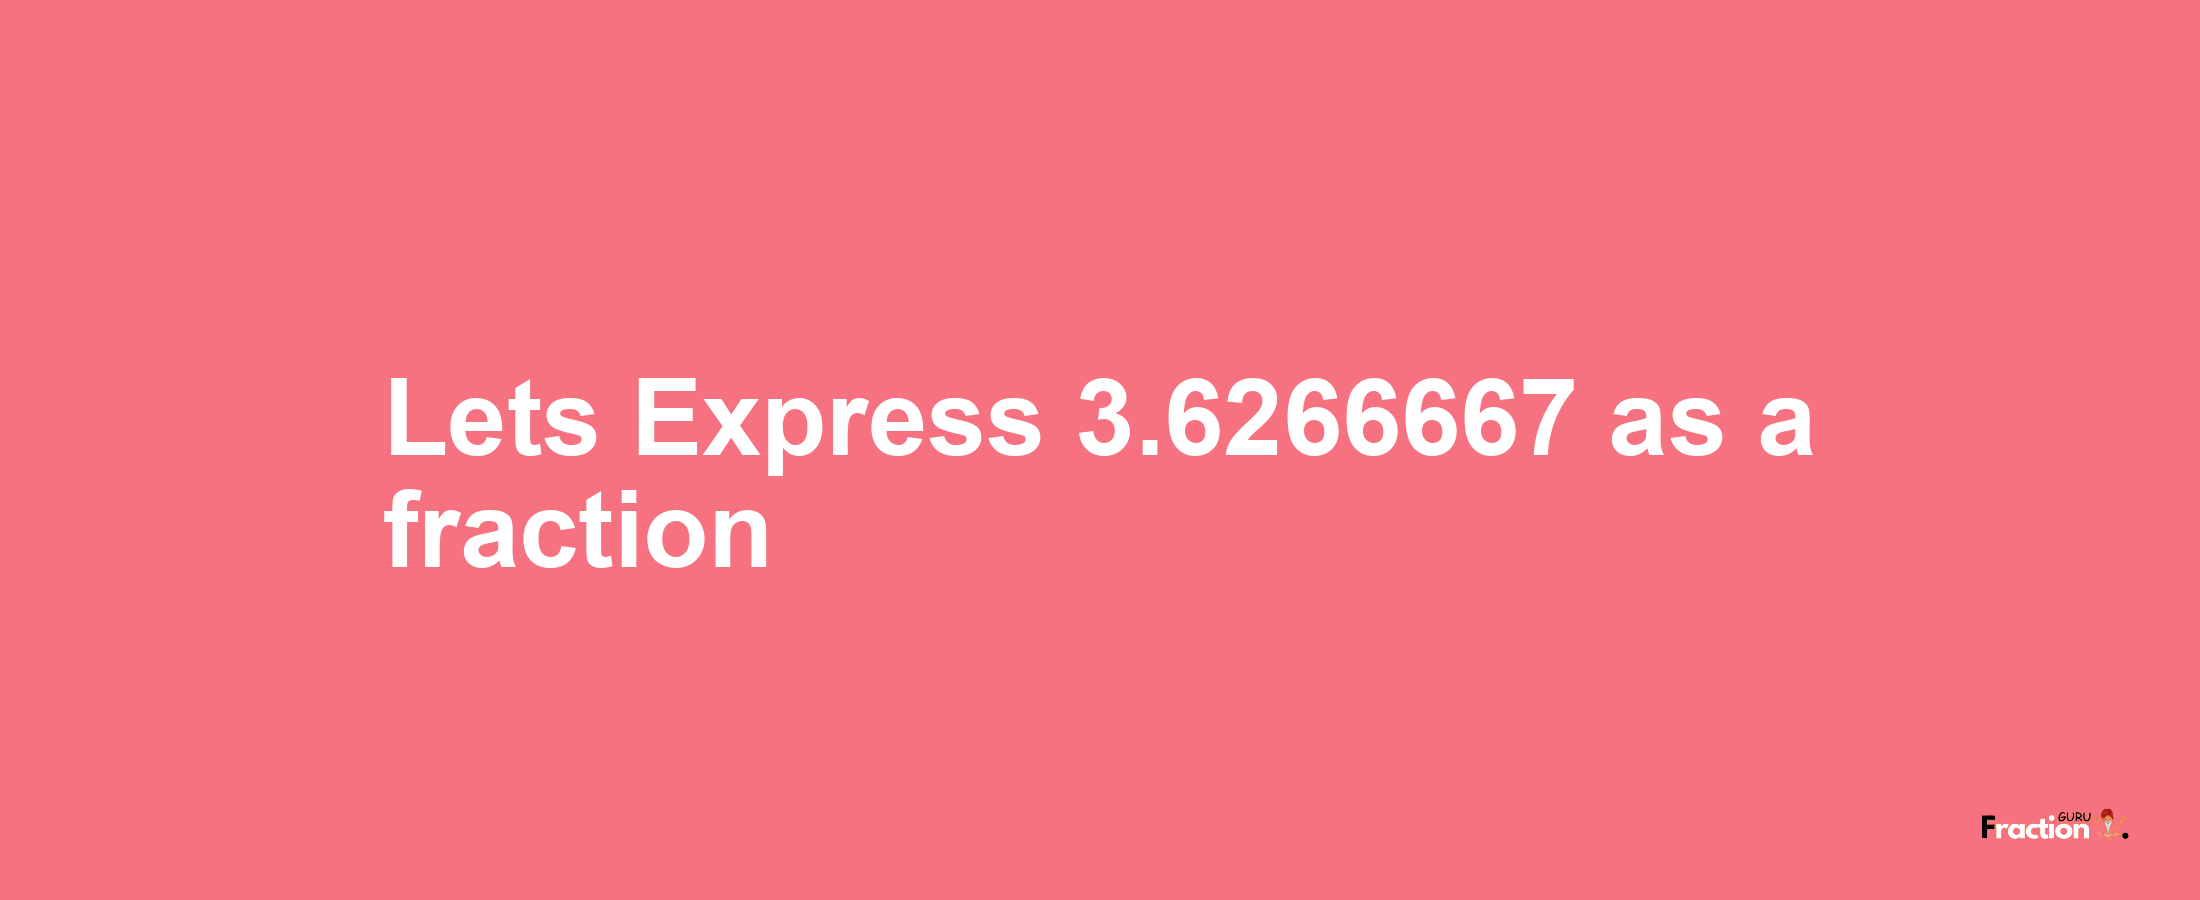 Lets Express 3.6266667 as afraction